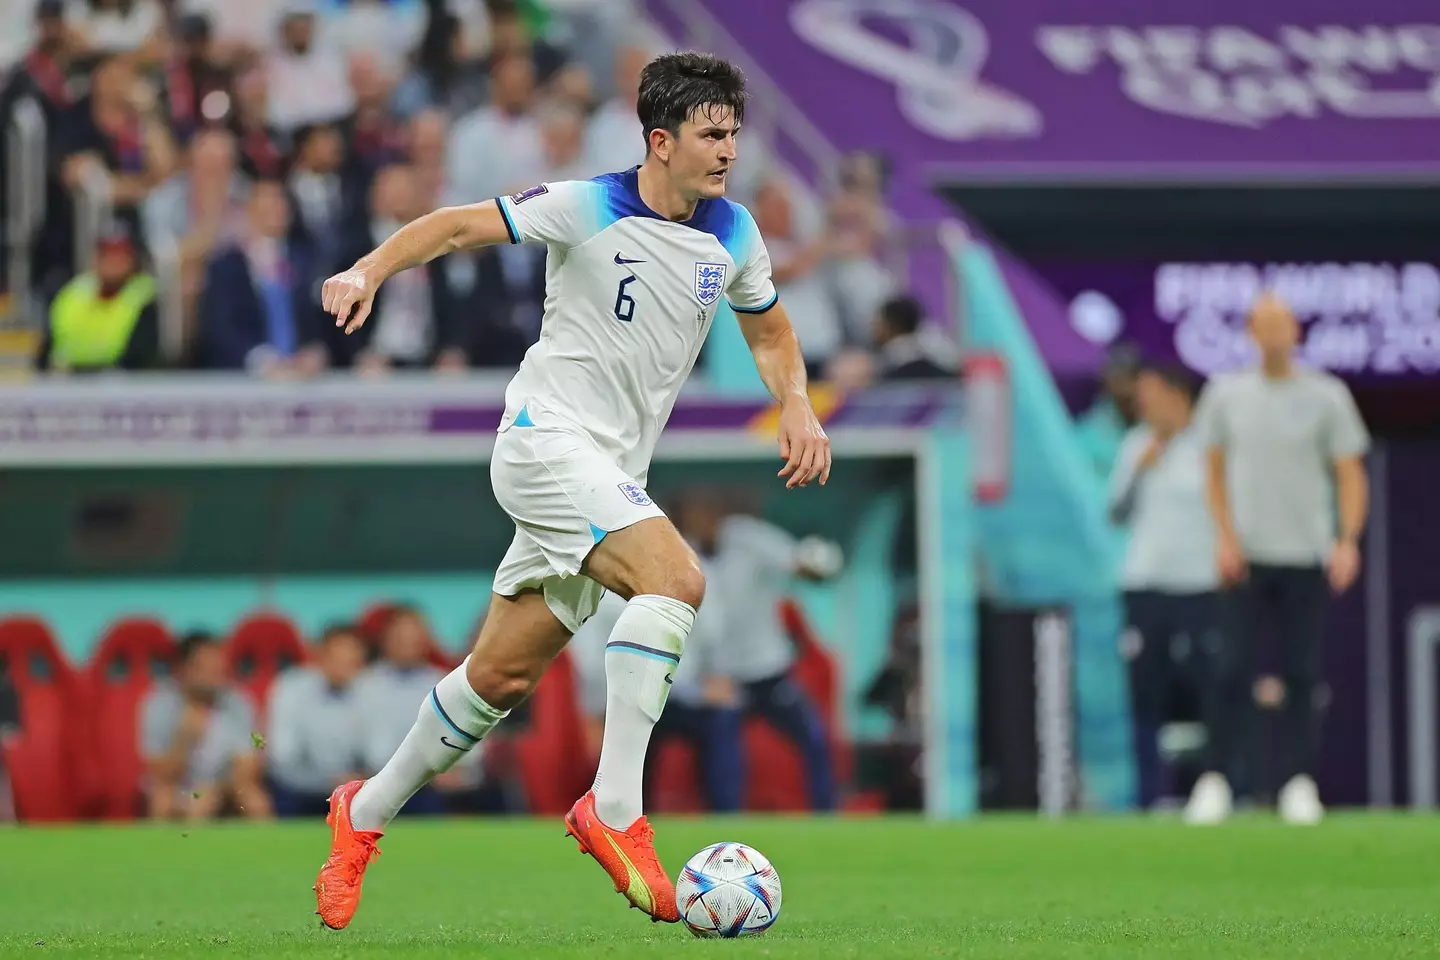 Manchester United captain Harry Maguire has started all three of England’s World Cup matches in Qatar.